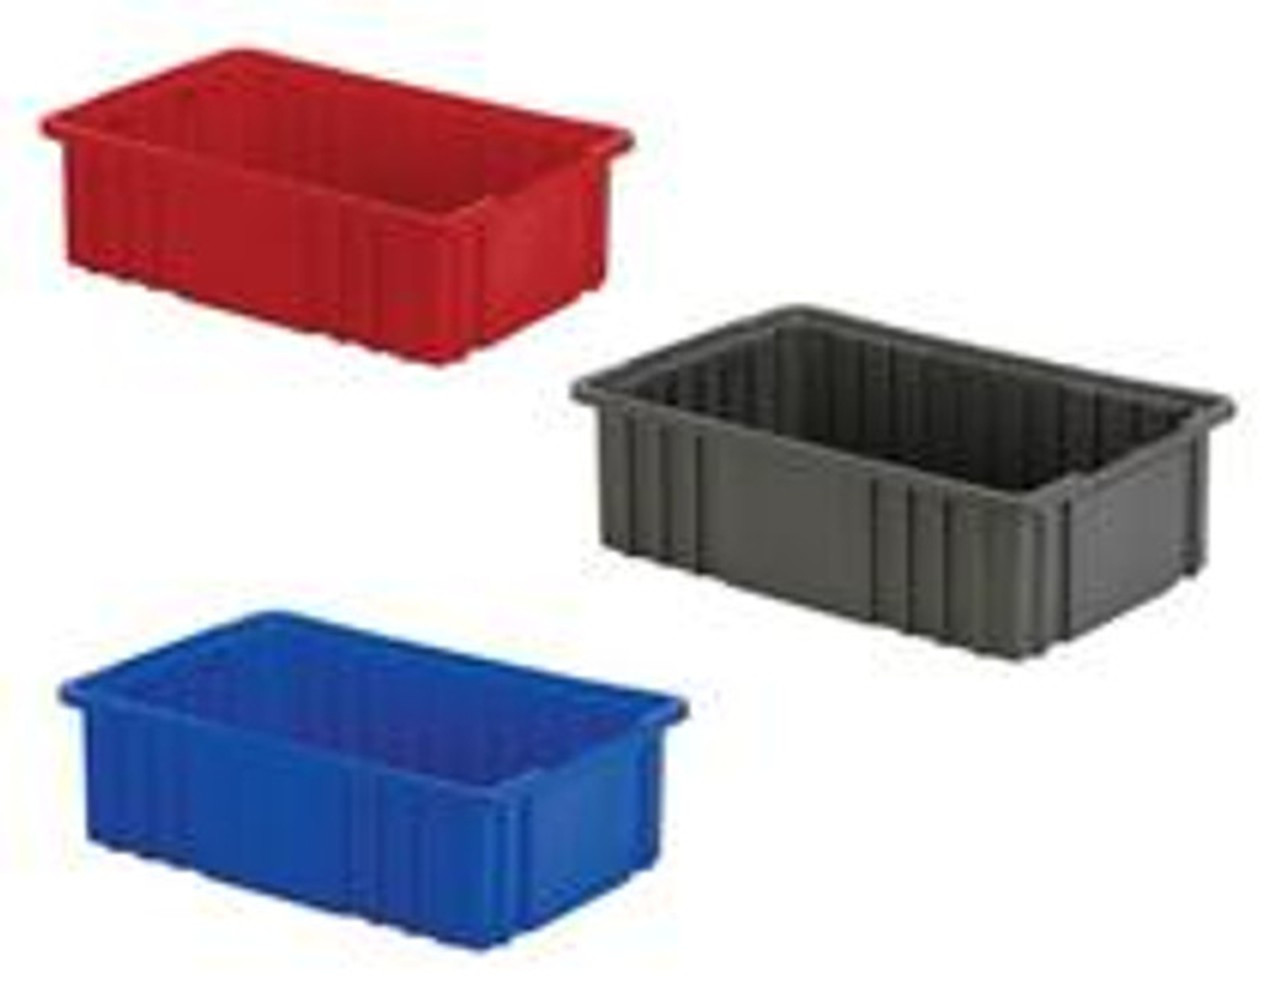 Divider Bins - Material Flow & Conveyor Systems Inc.